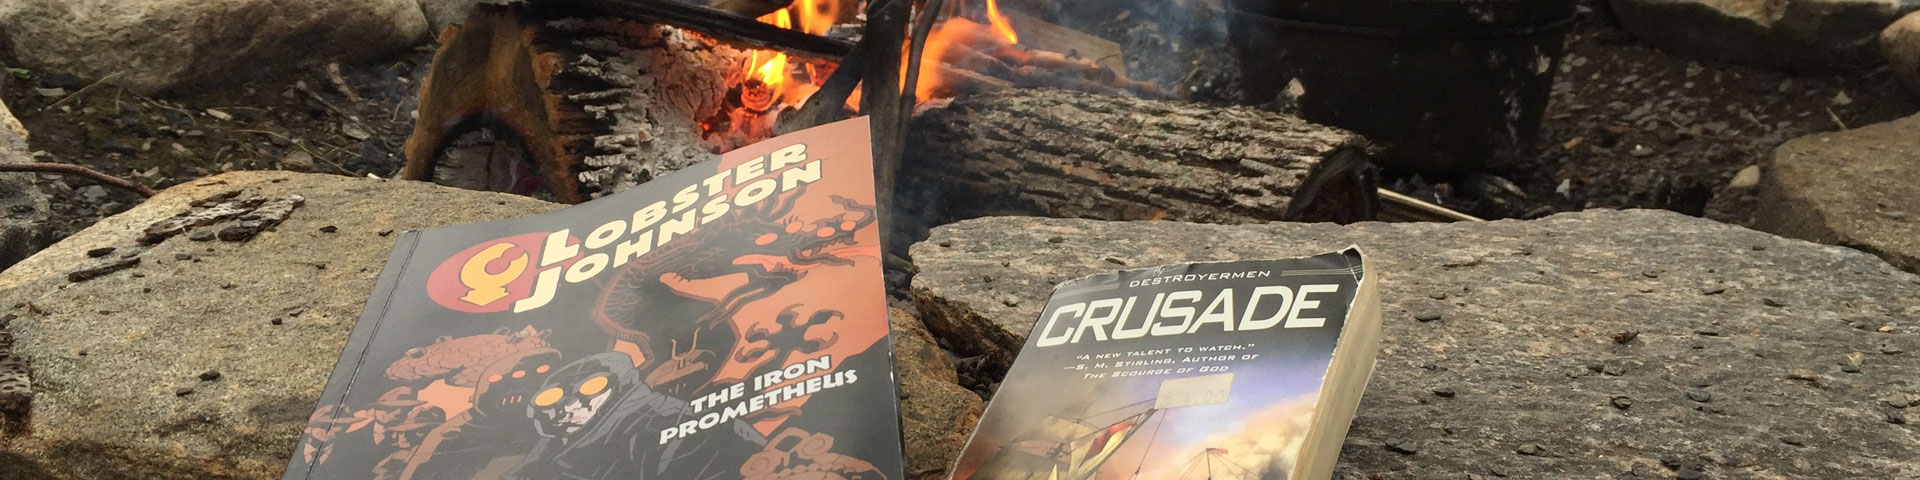 Two books -- Lobster Johnson and Crusade -- rest on rocks next to a fire pit. A fire can be seen burning in the upper portion of the photograph.